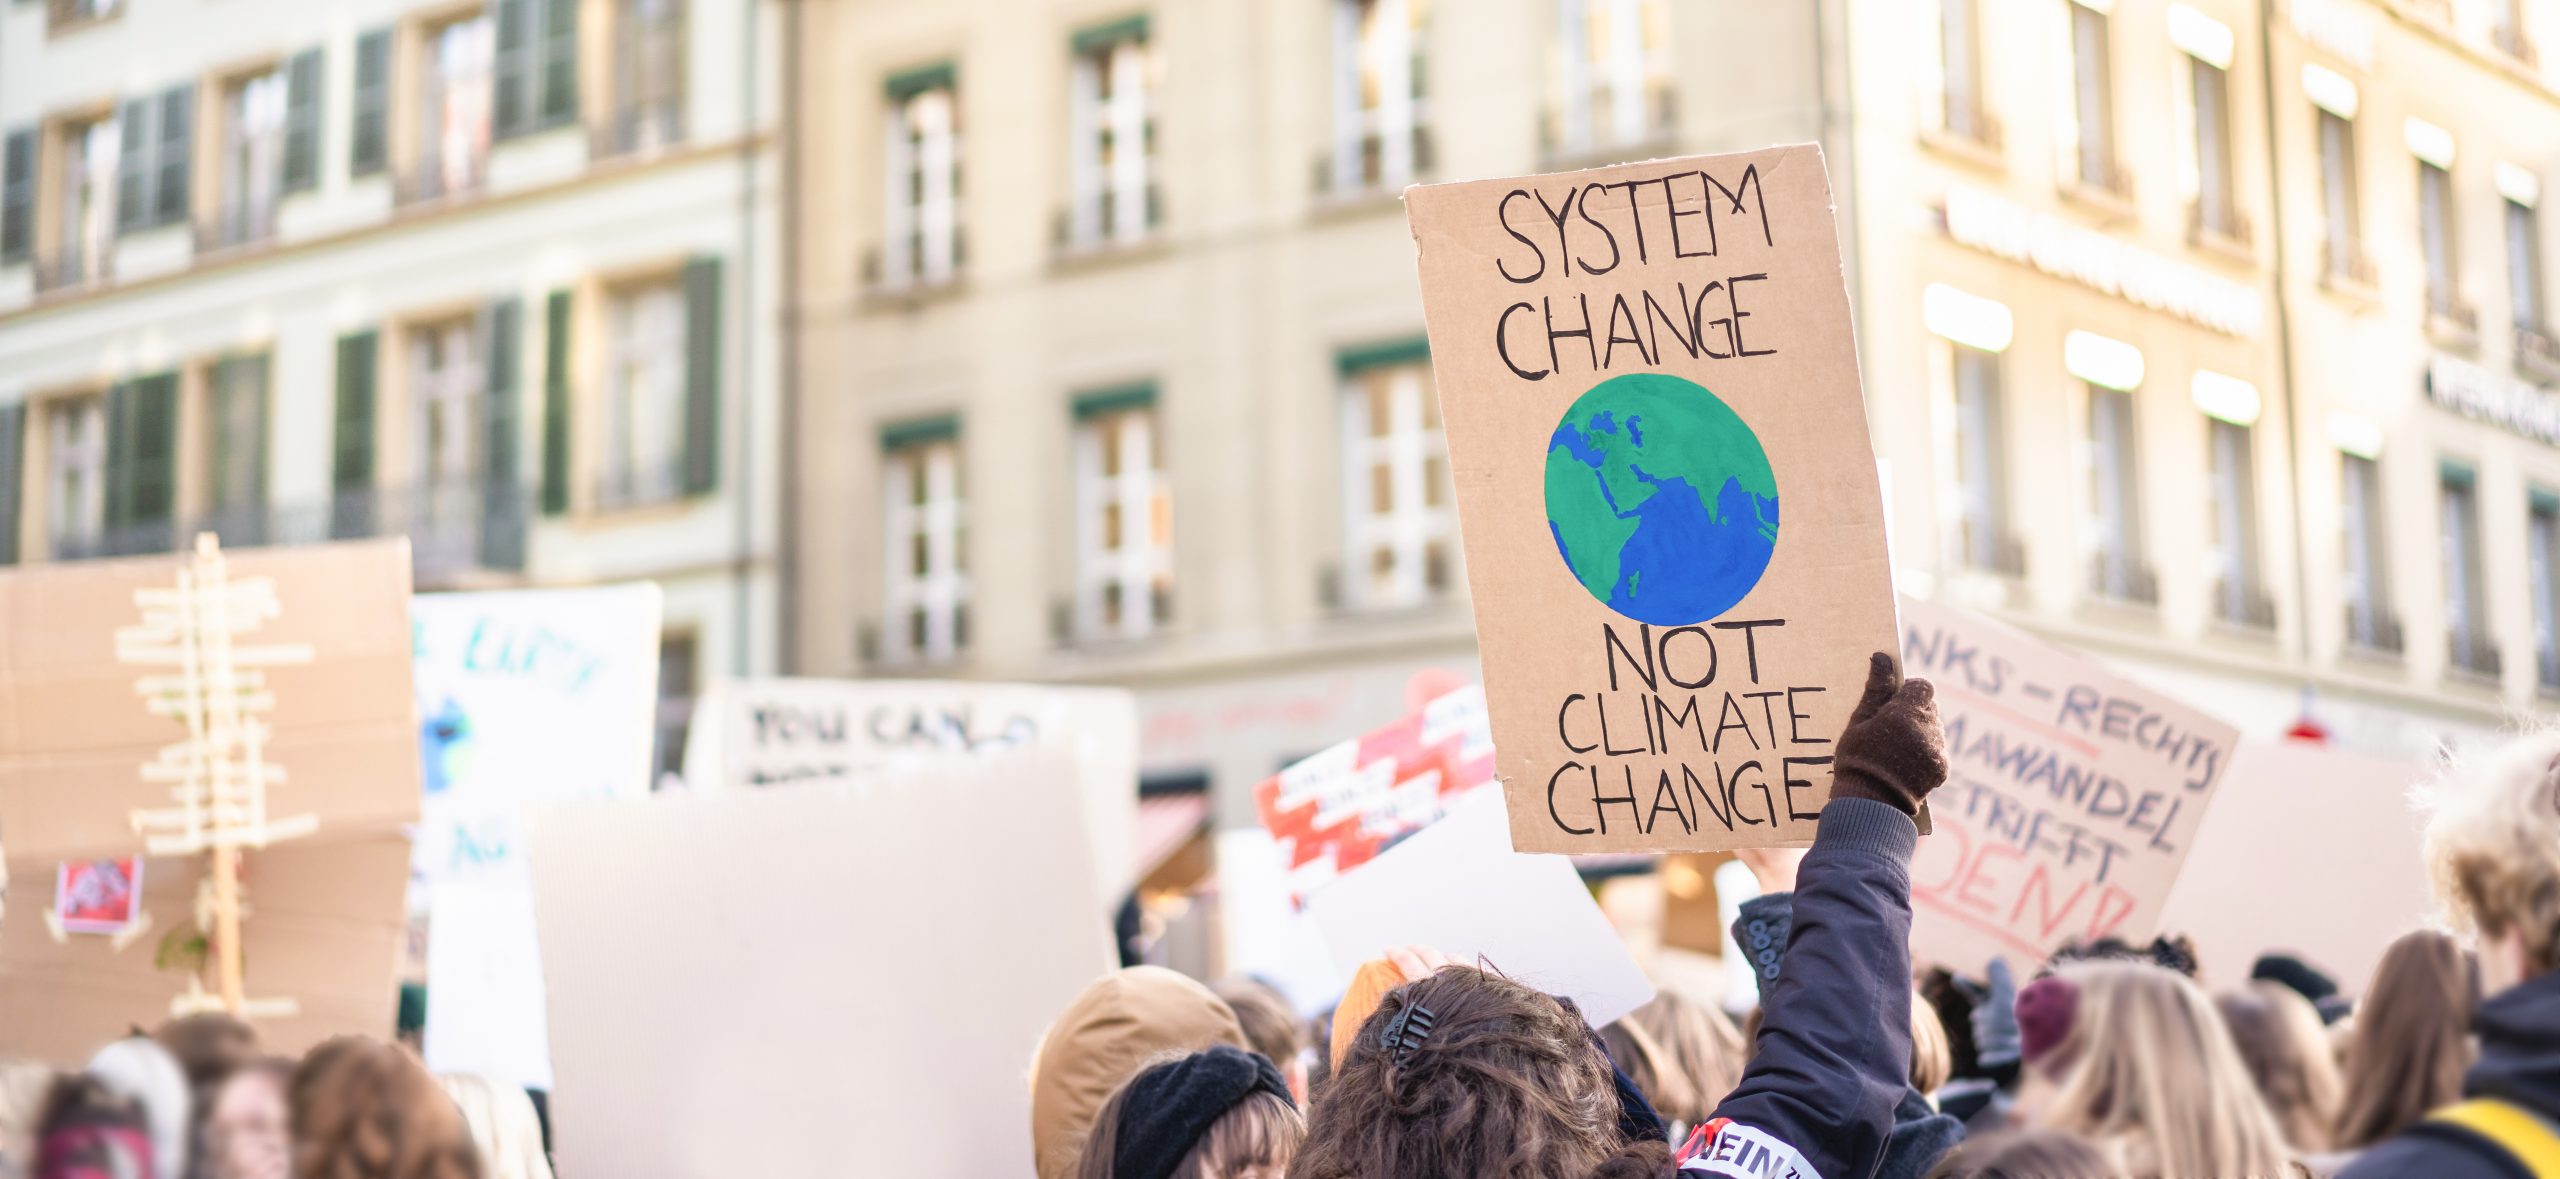 A protestor holds a sign saying "System Change Not Climate Change"